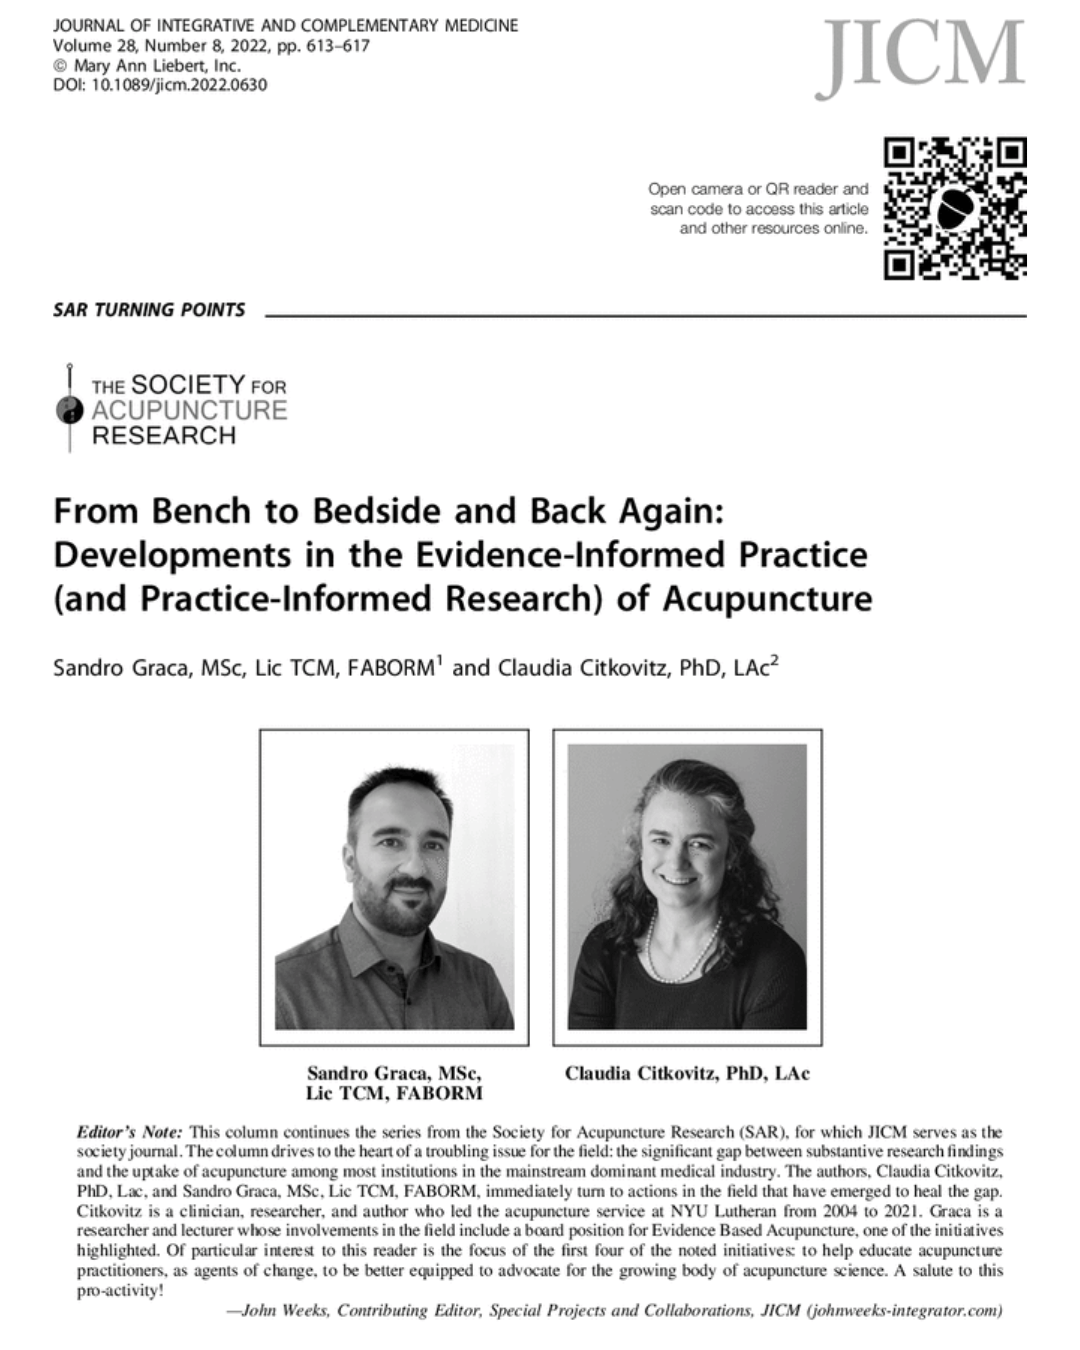 From Bench to Bedside and Back Again: Developments in the Evidence-Informed Practice (and Practice-Informed Research) of Acupuncture